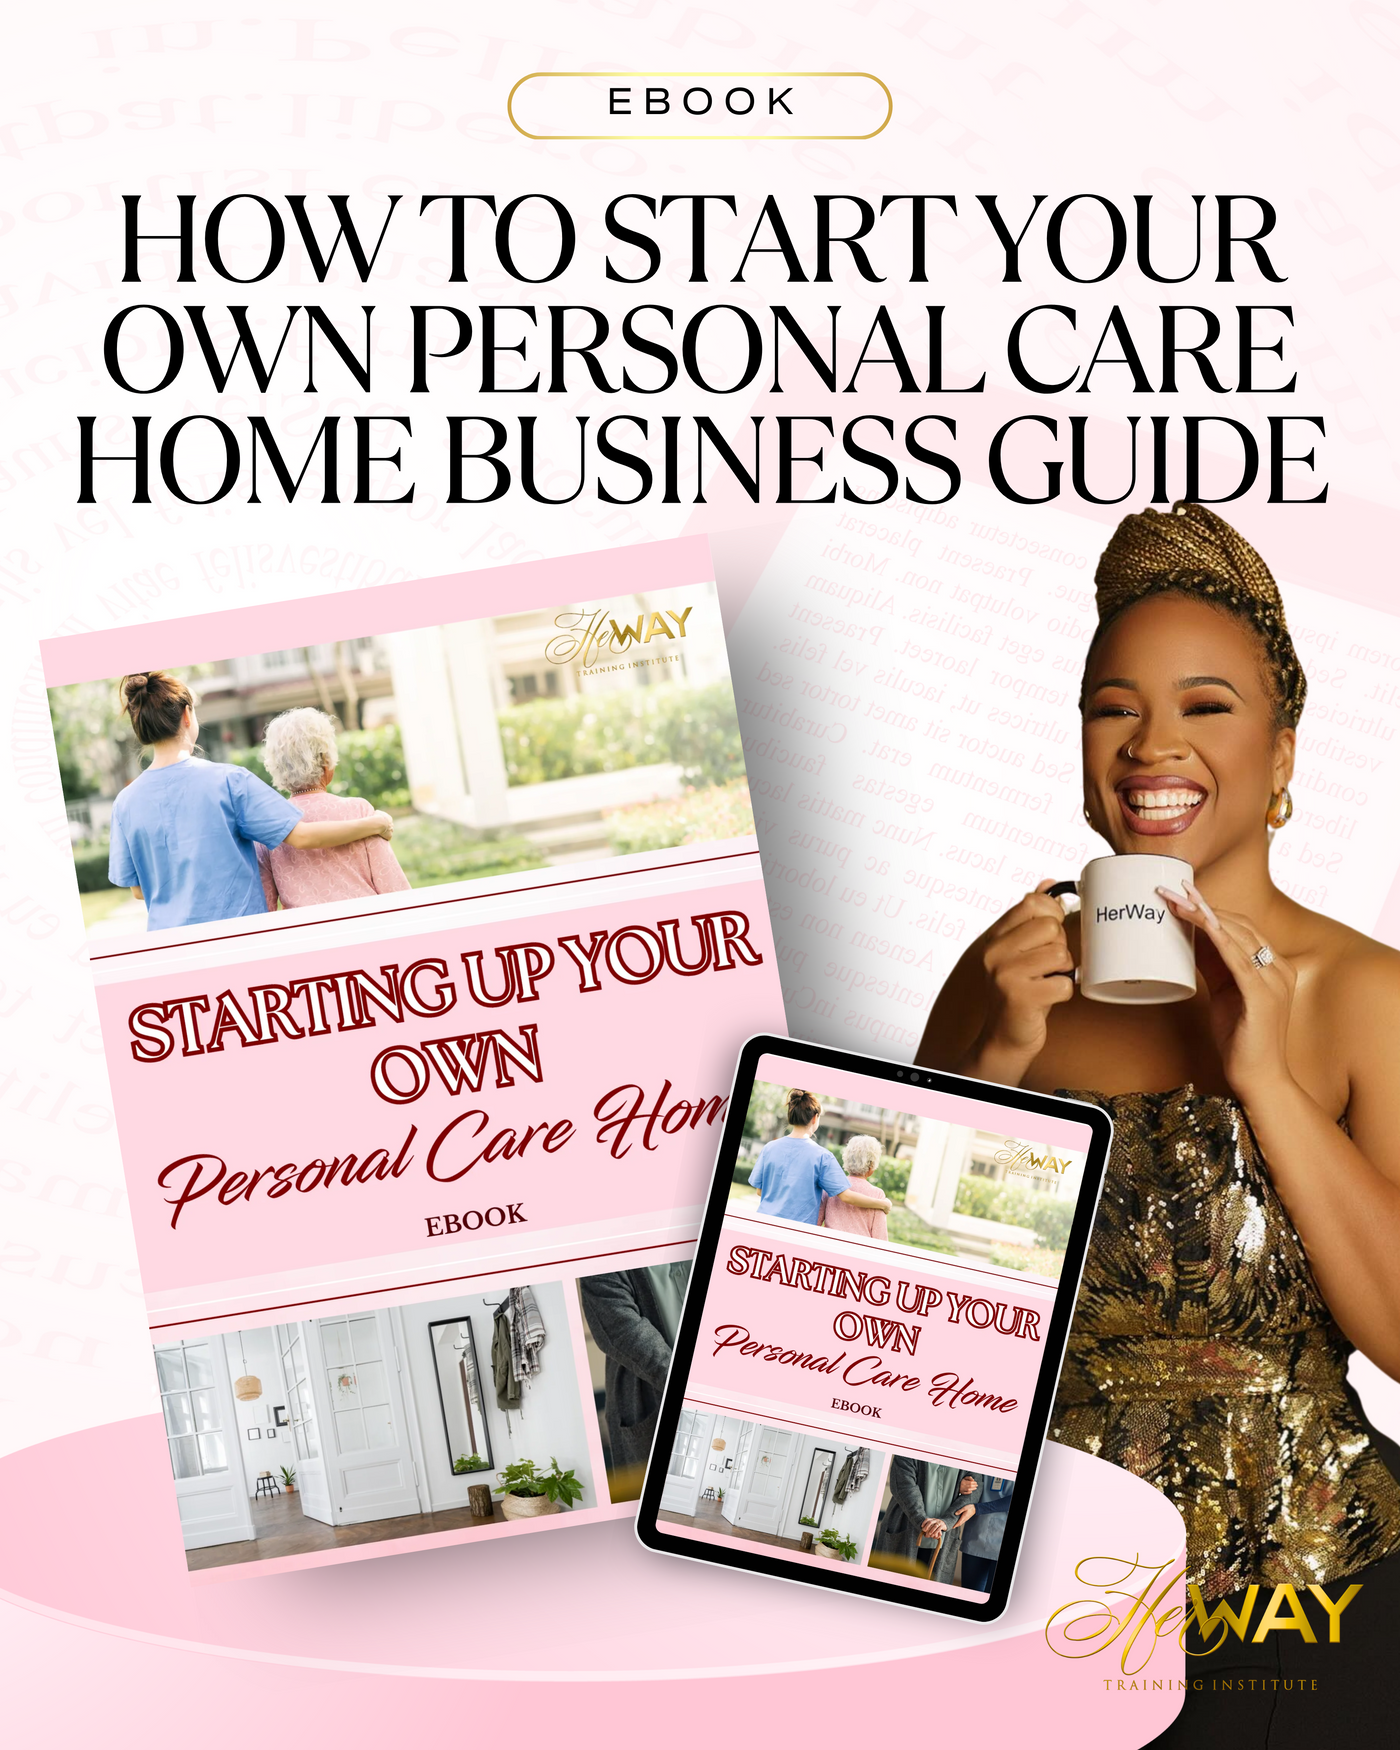 How To Start Your Own Personal Care Home Business Guide - eBook